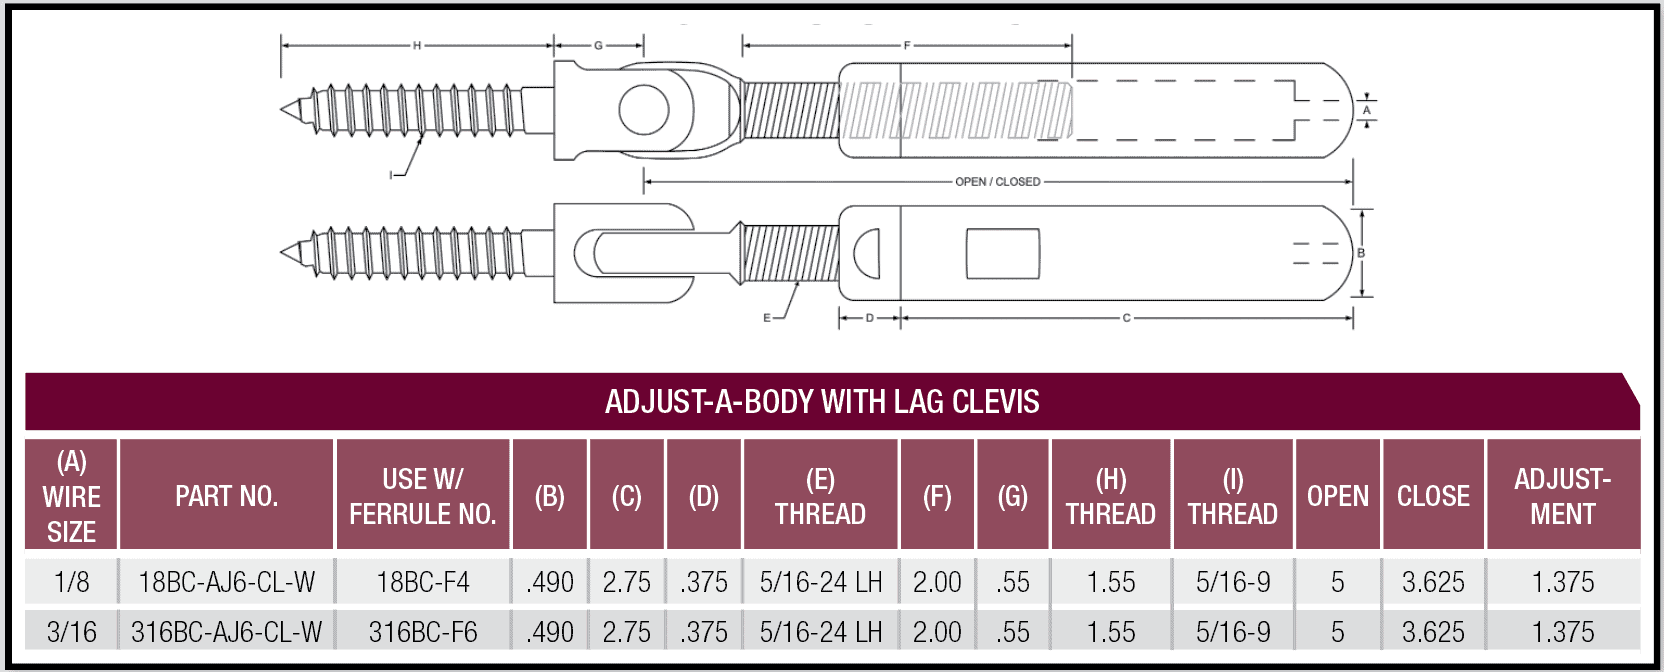 adjust-a-body with lag clevis chart